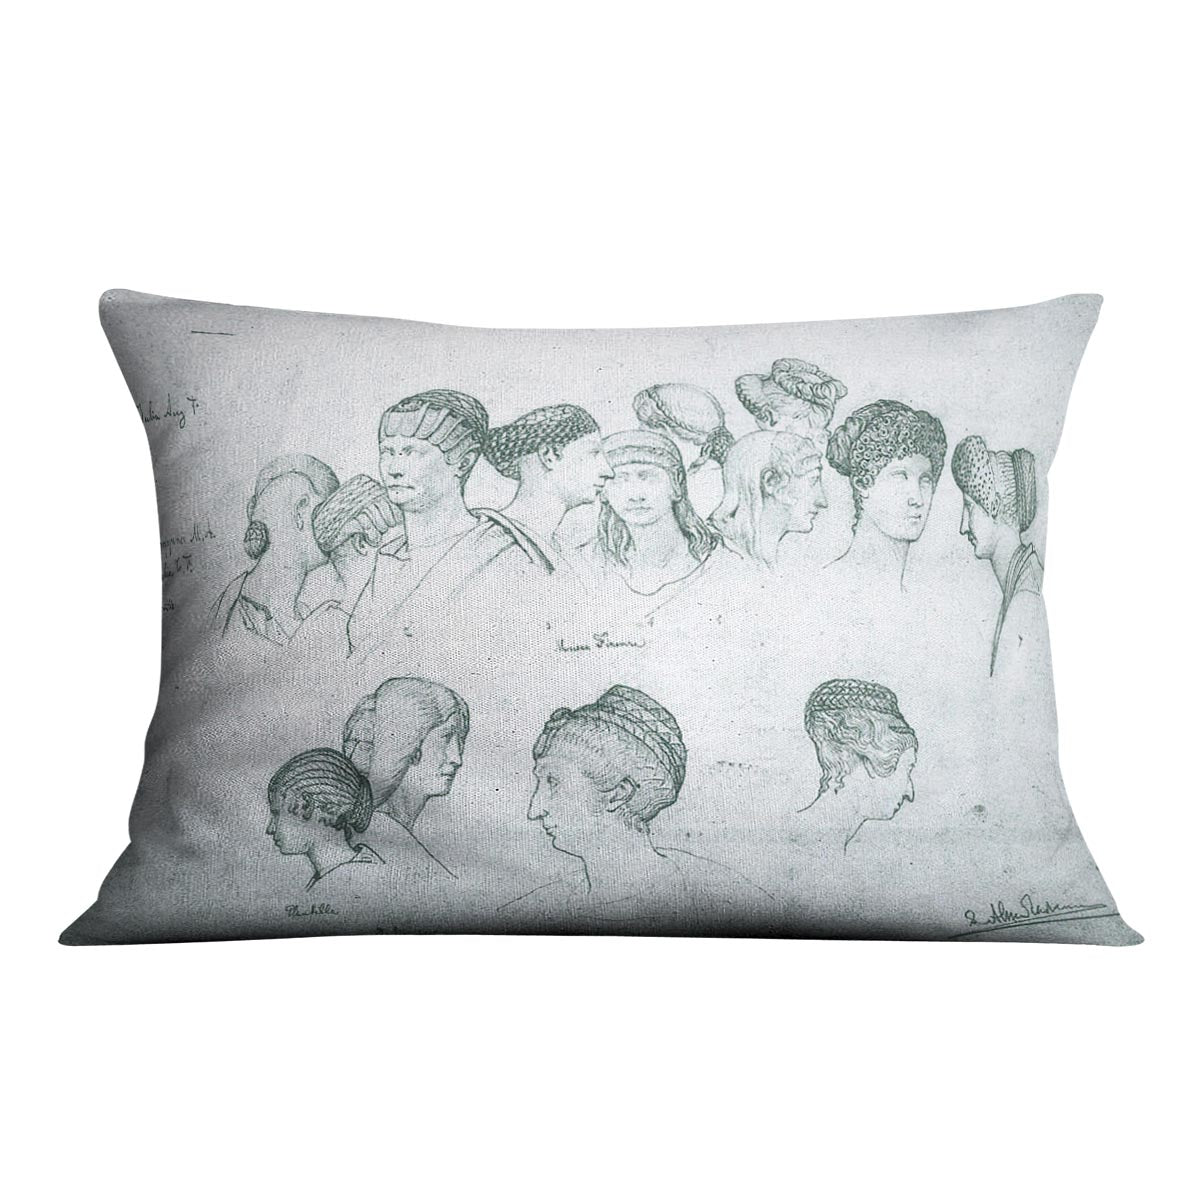 Sketch of hairstyles from ancient sculptures by Alma Tadema Cushion - Canvas Art Rocks - 4